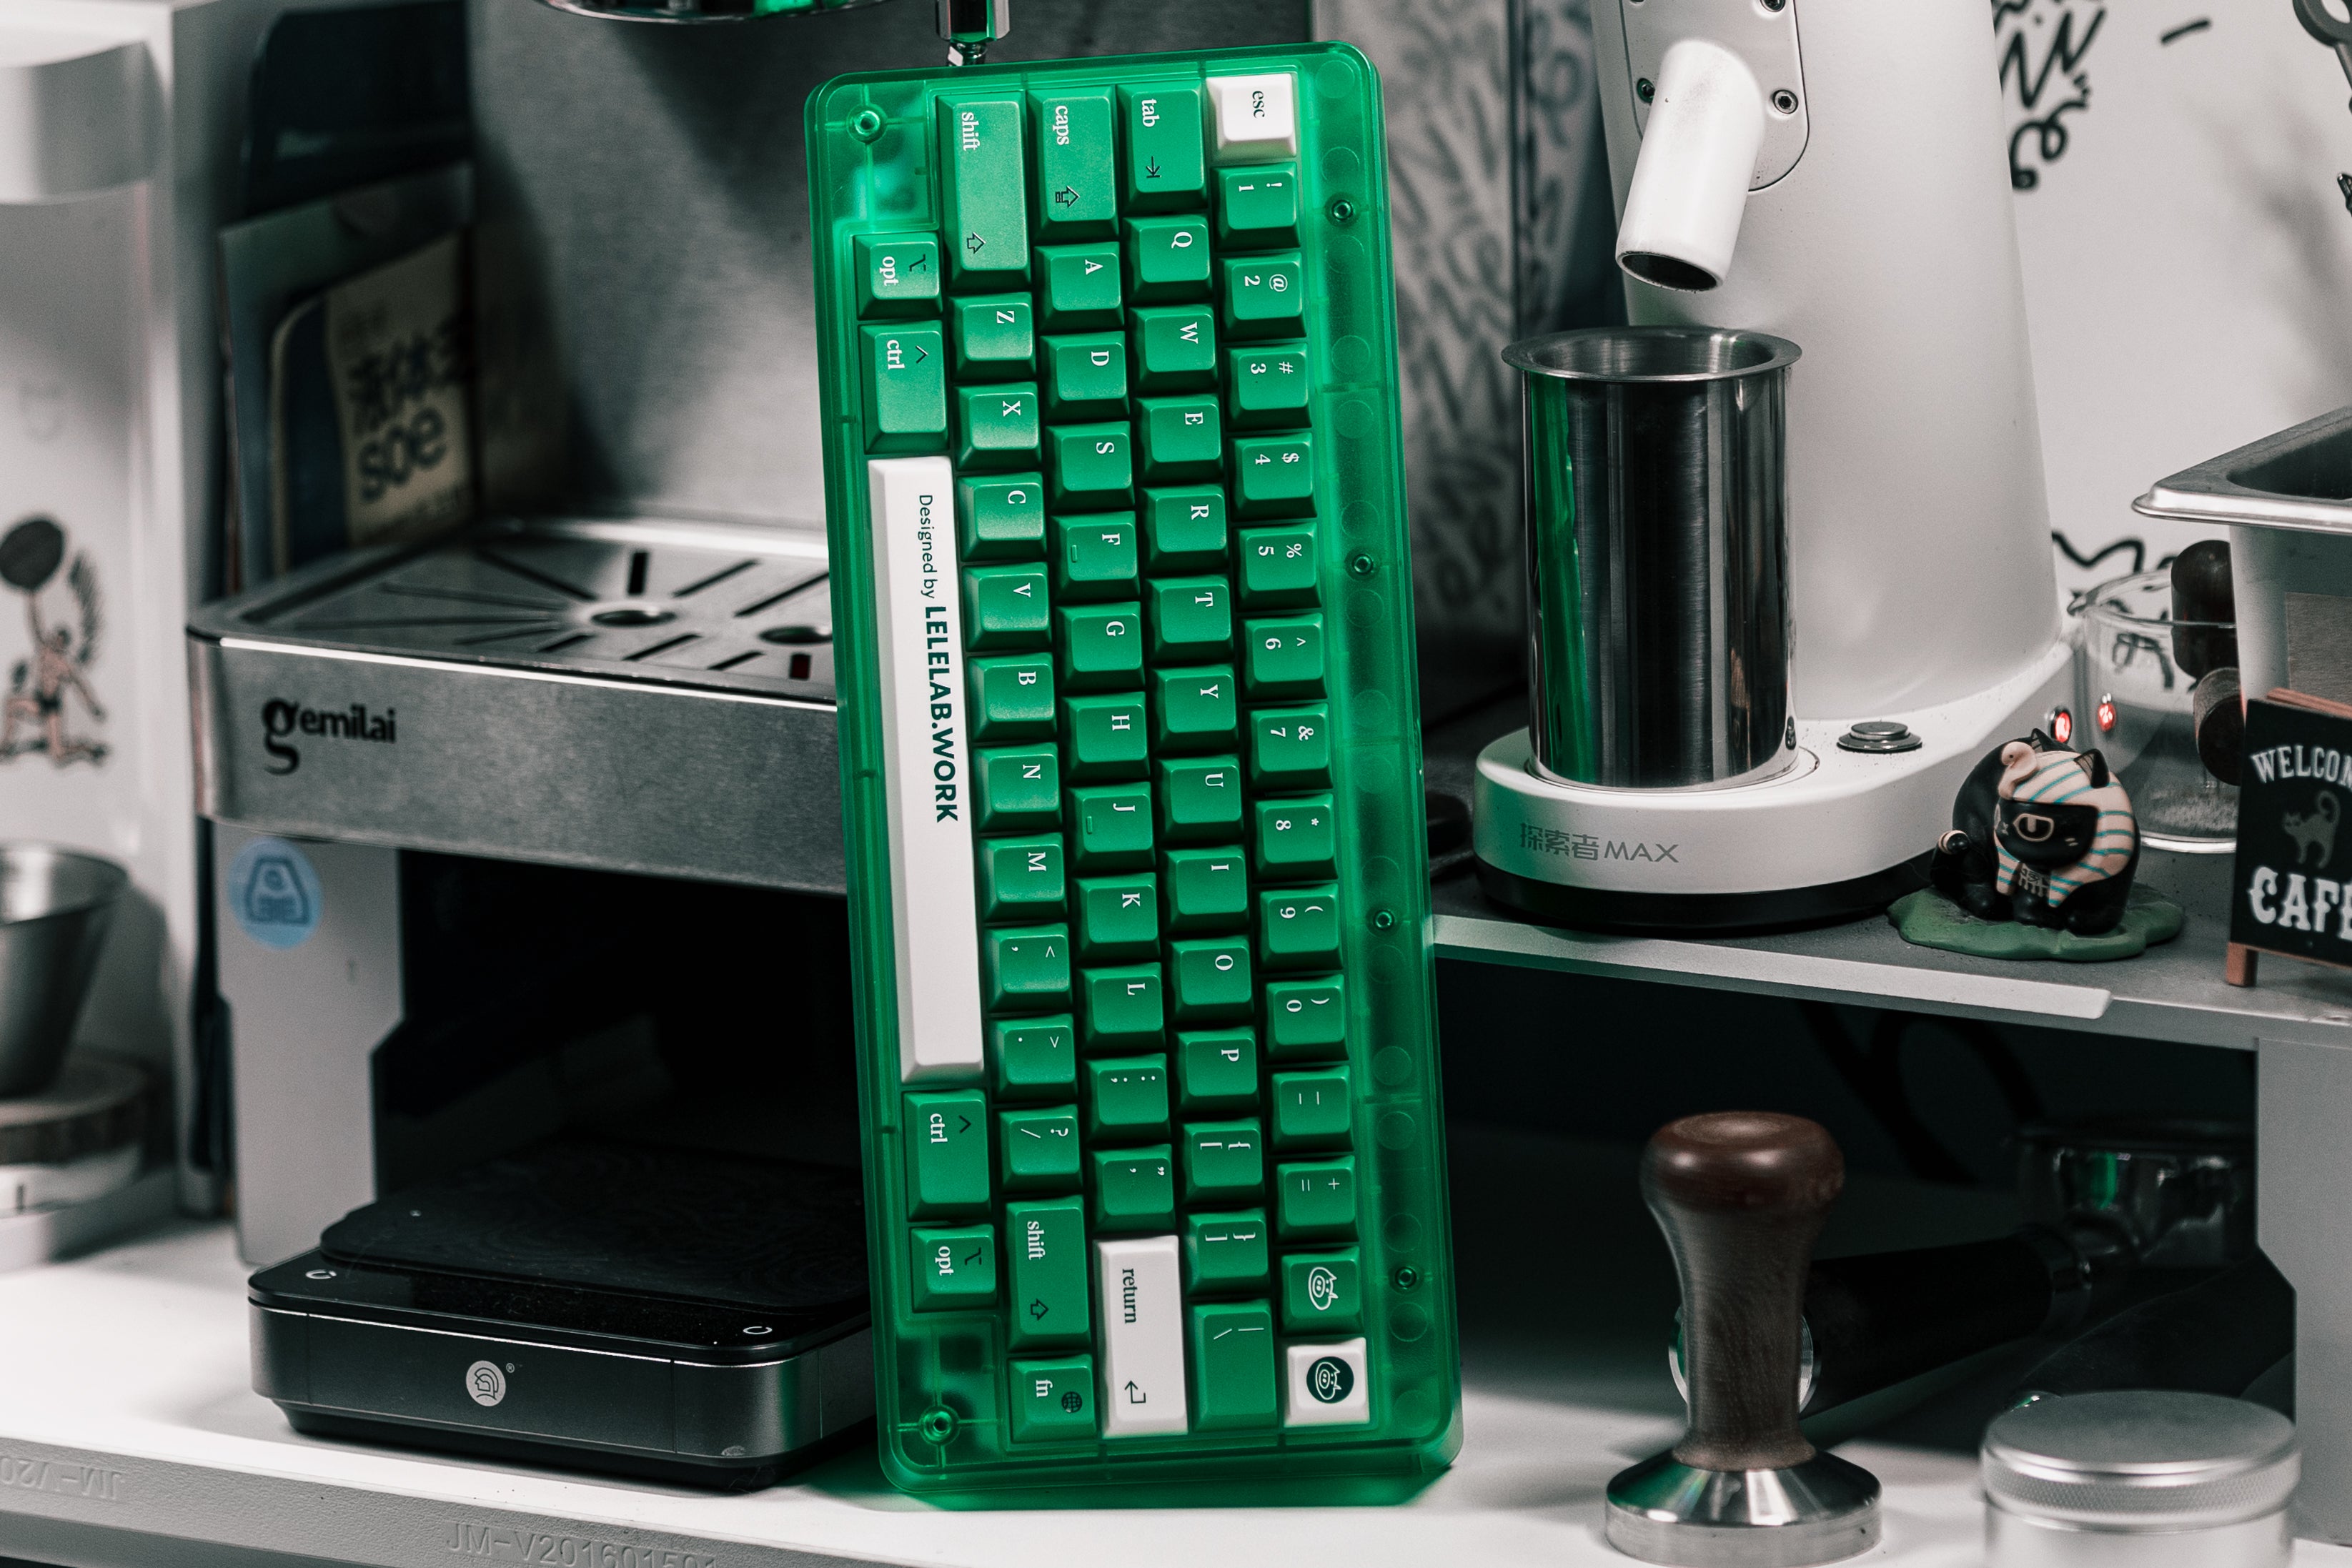 [In Stock] LeleLab Supsup Colombian Green Emerald Keycap Set